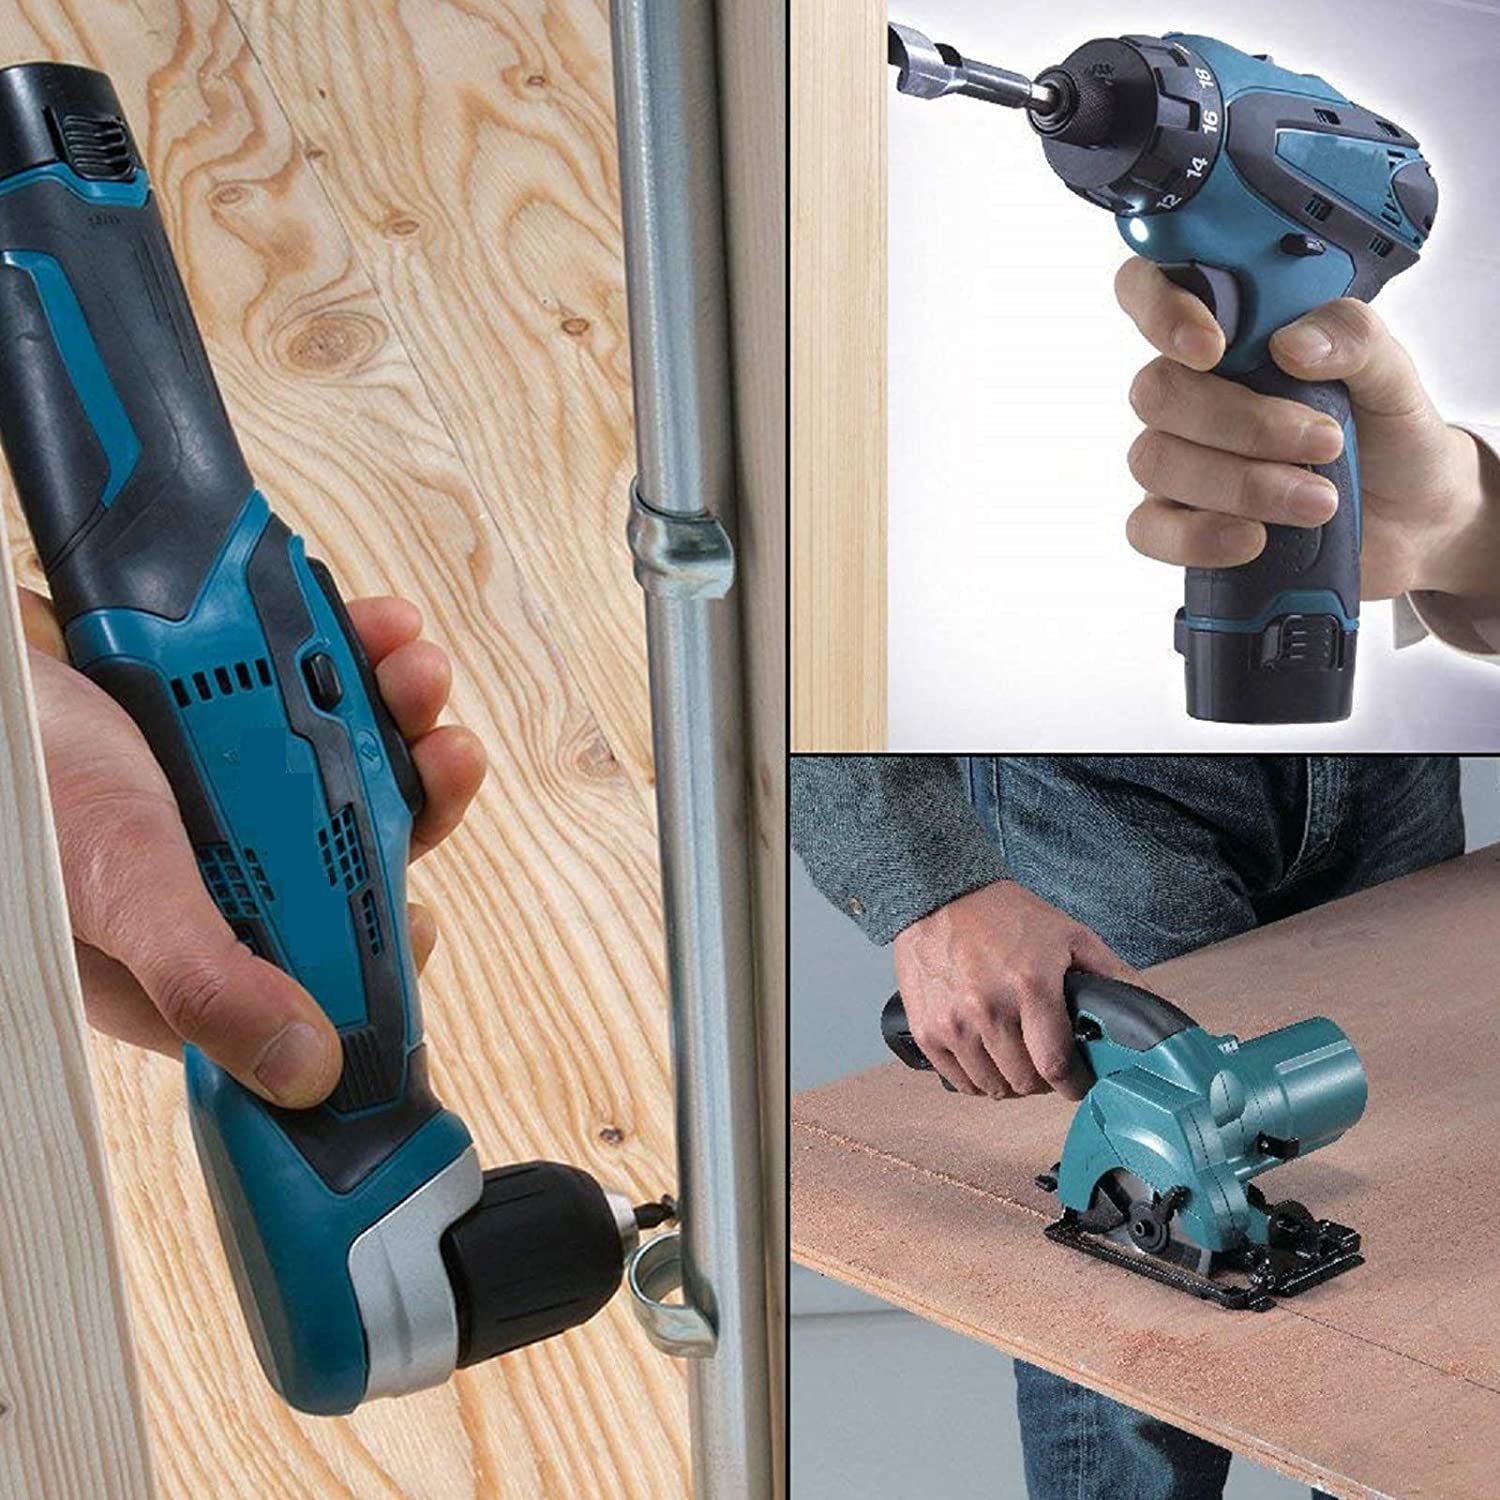 The structure and principle of the rechargeable drill